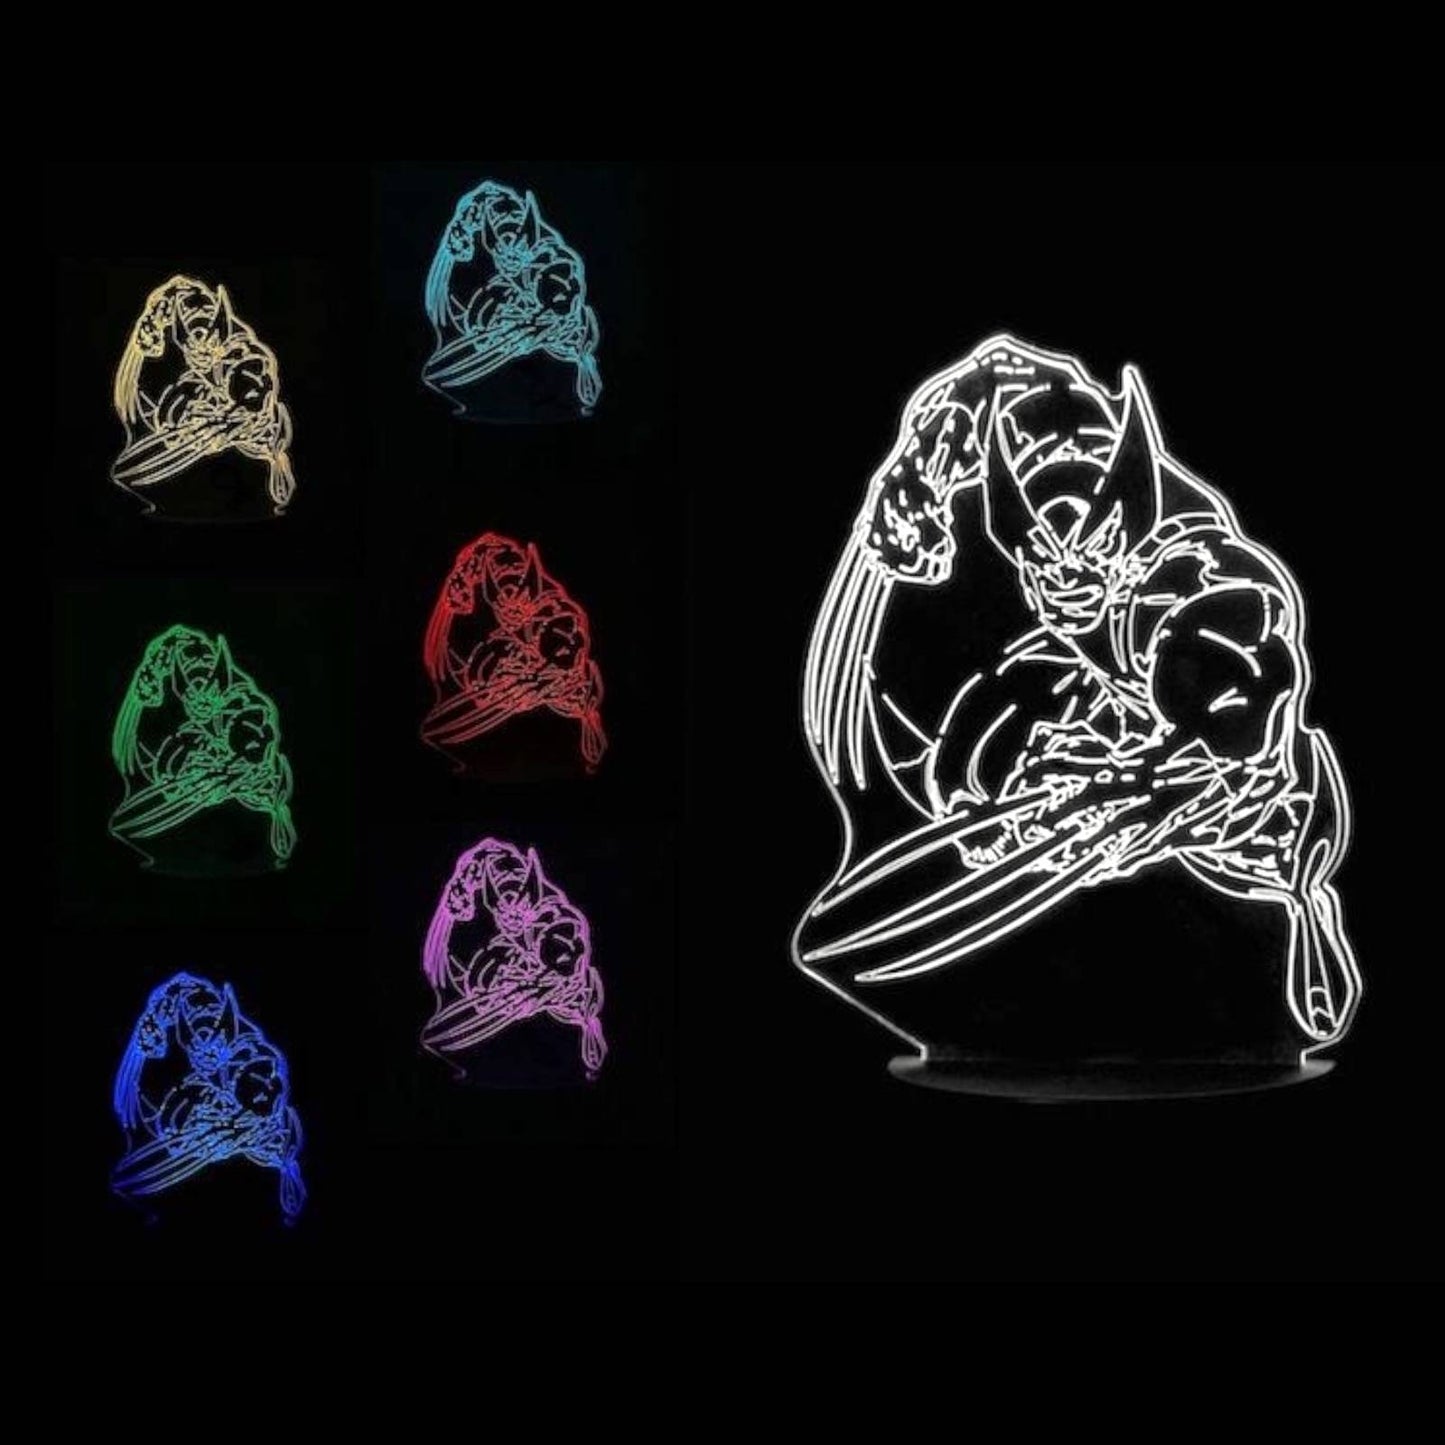 Wolverine 3D LED Night-Light 7 Color Changing Lamp w/ Touch Switch